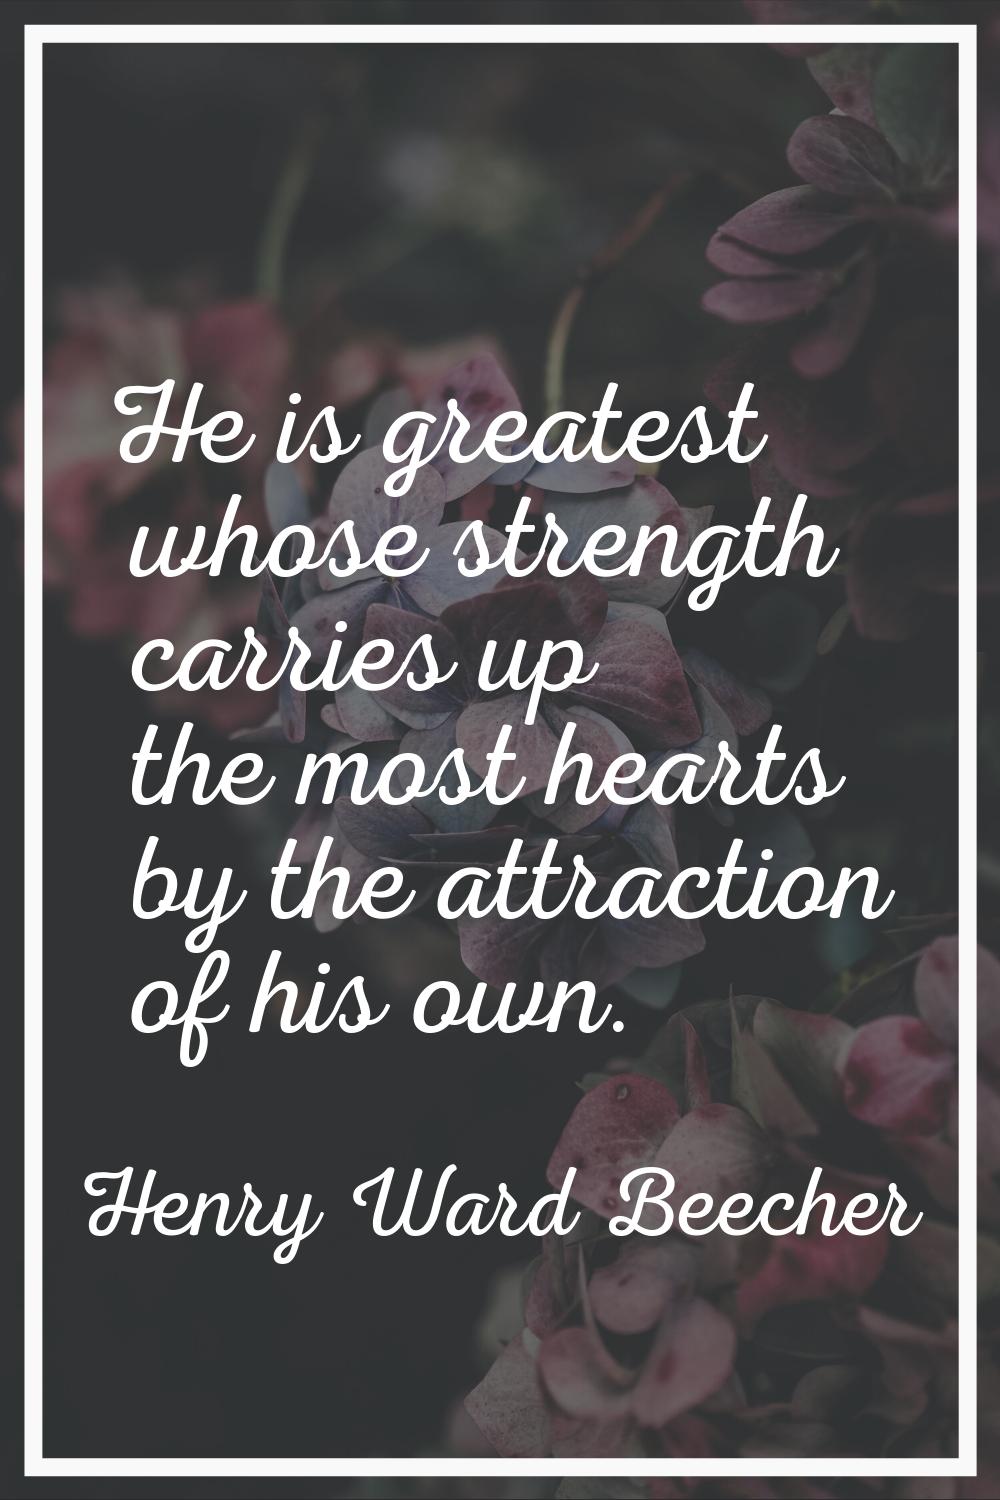 He is greatest whose strength carries up the most hearts by the attraction of his own.